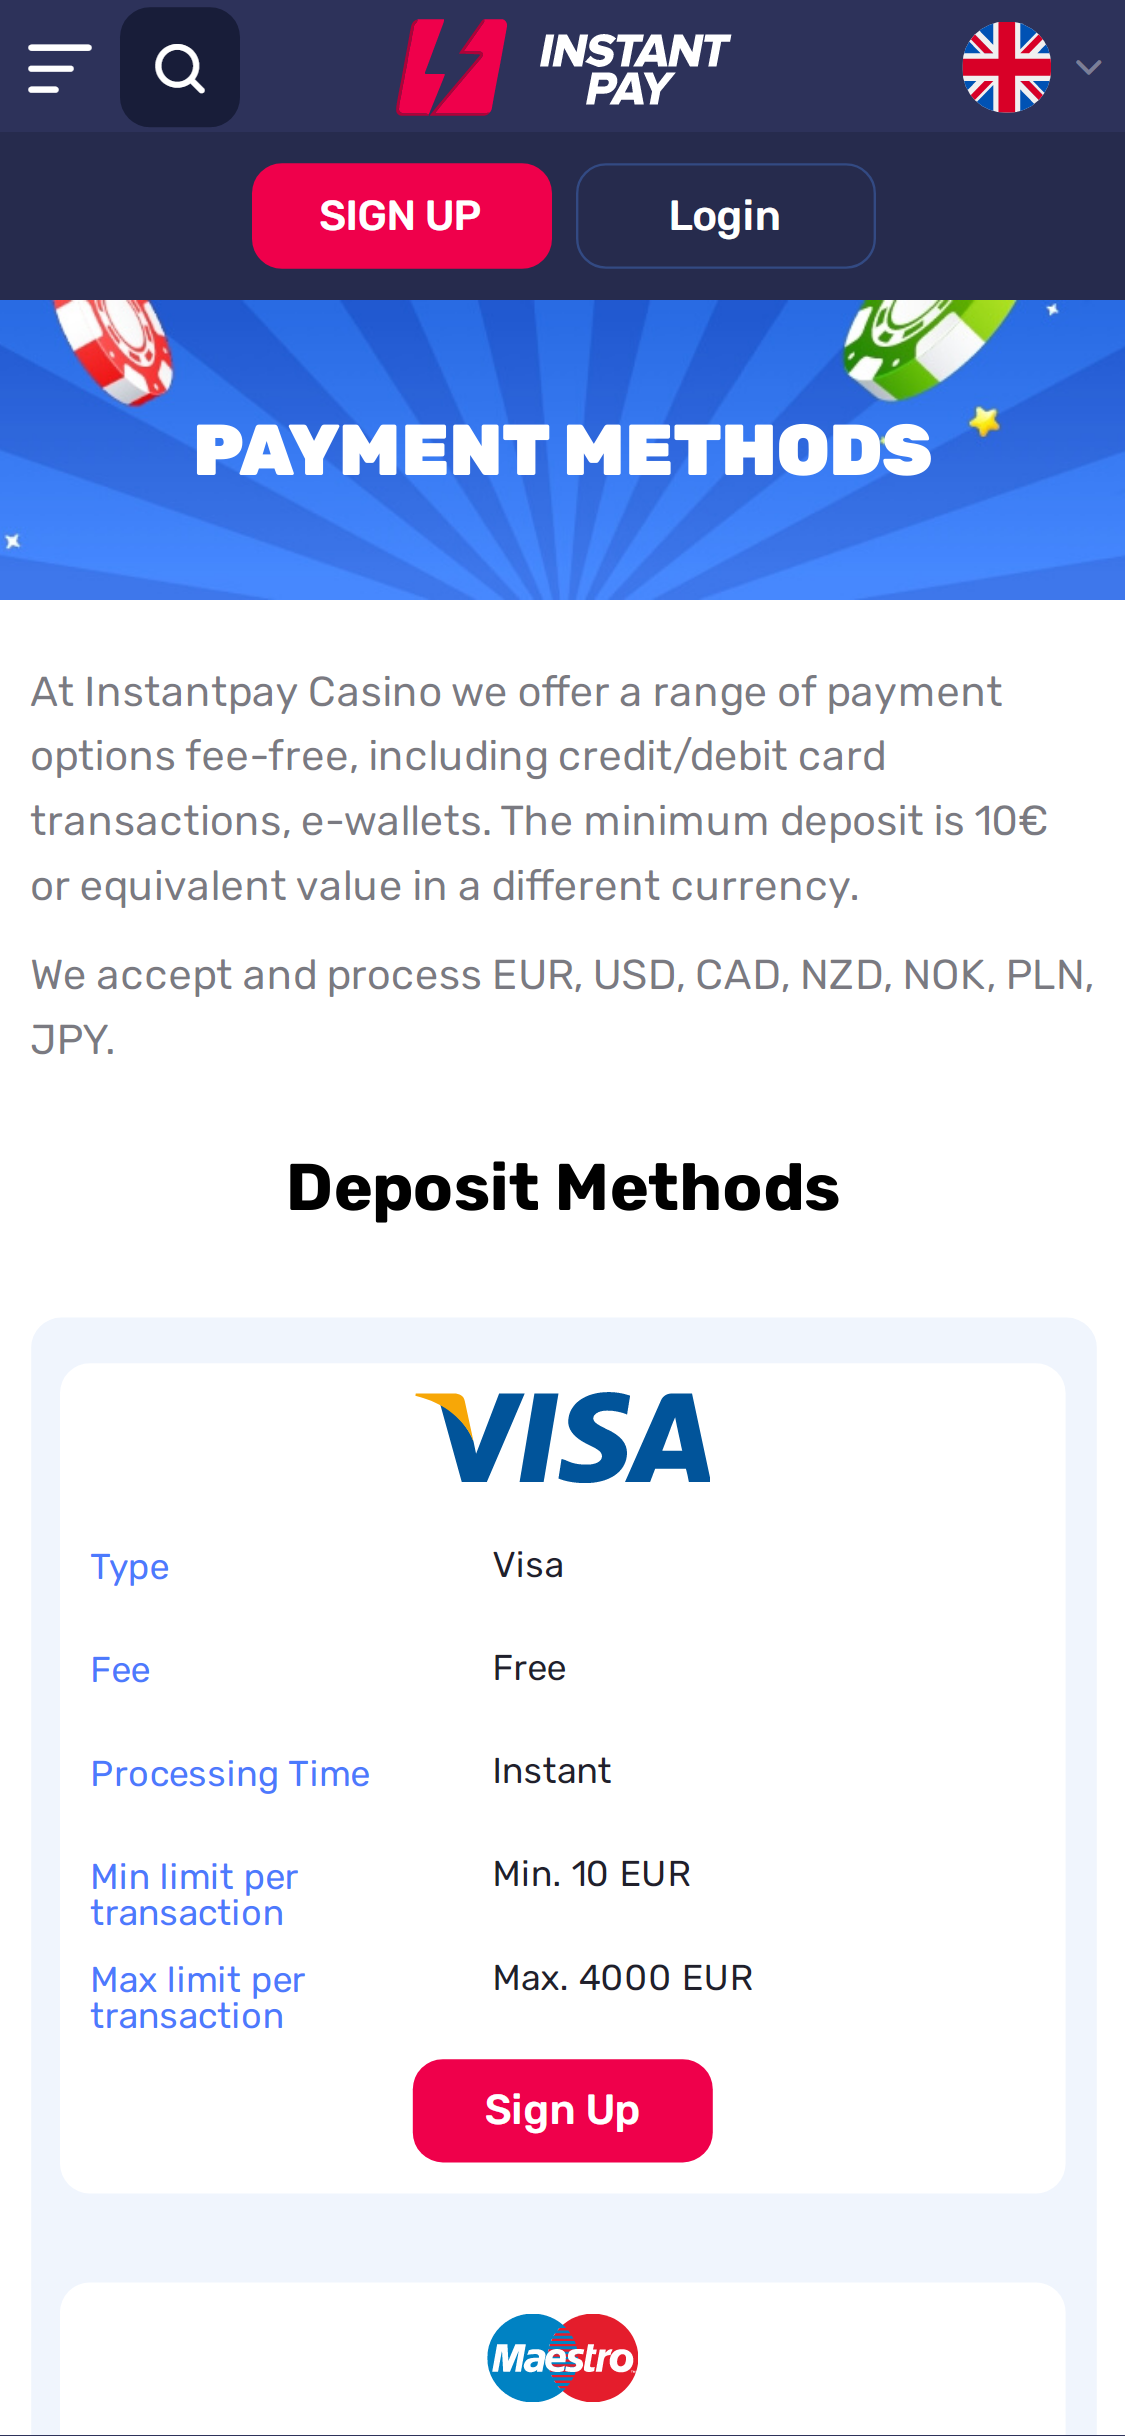 Instant Pay Casino Mobile Payment Methods Review